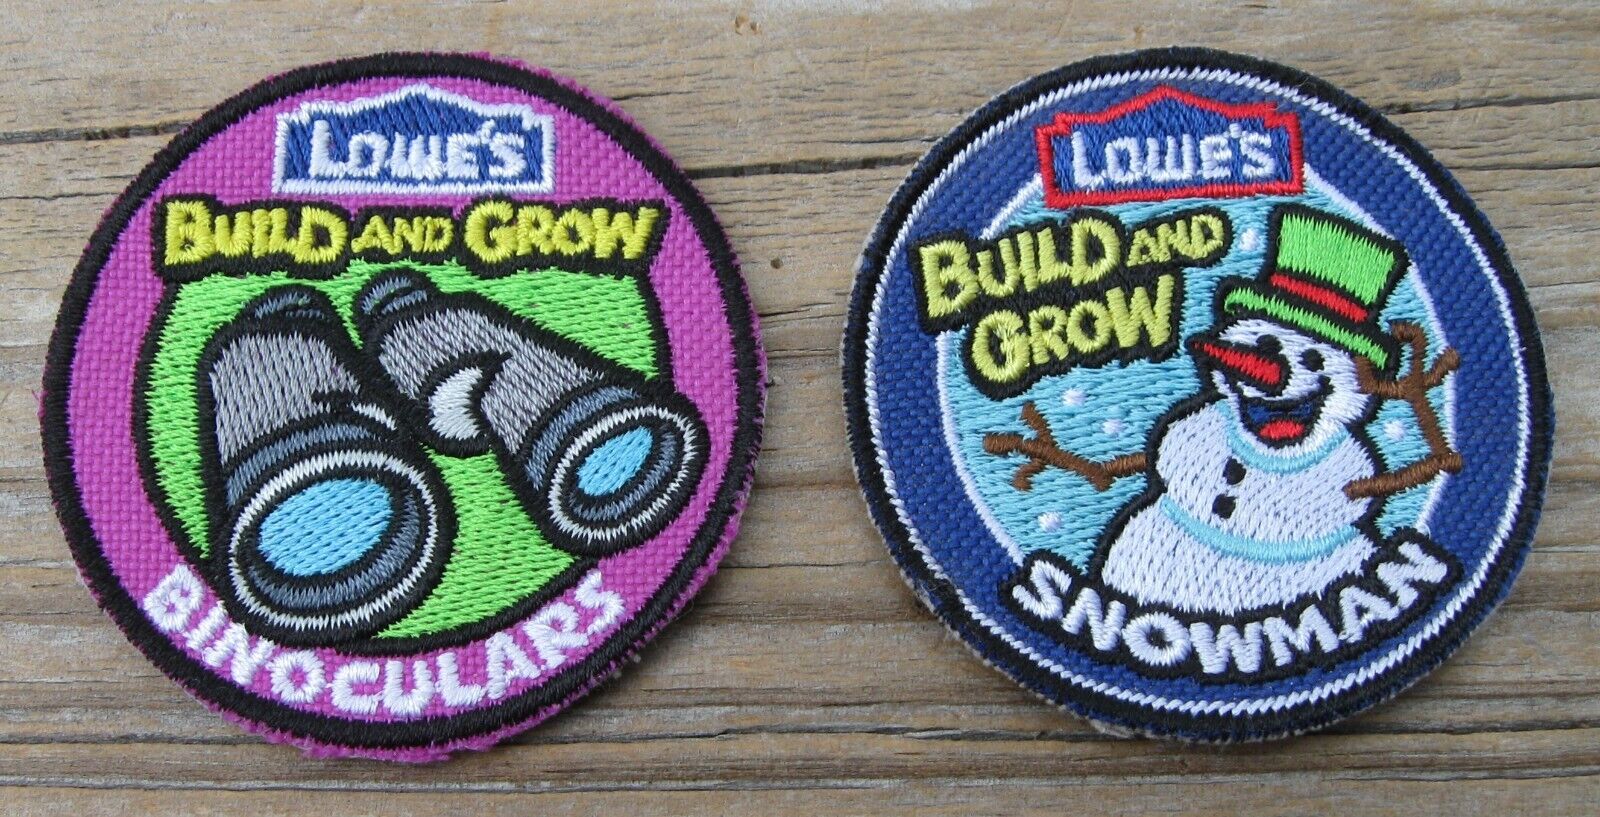 LOWE\'S Build and Grow Snowman - Binoculars Patches Badges Kids Clinic (2)